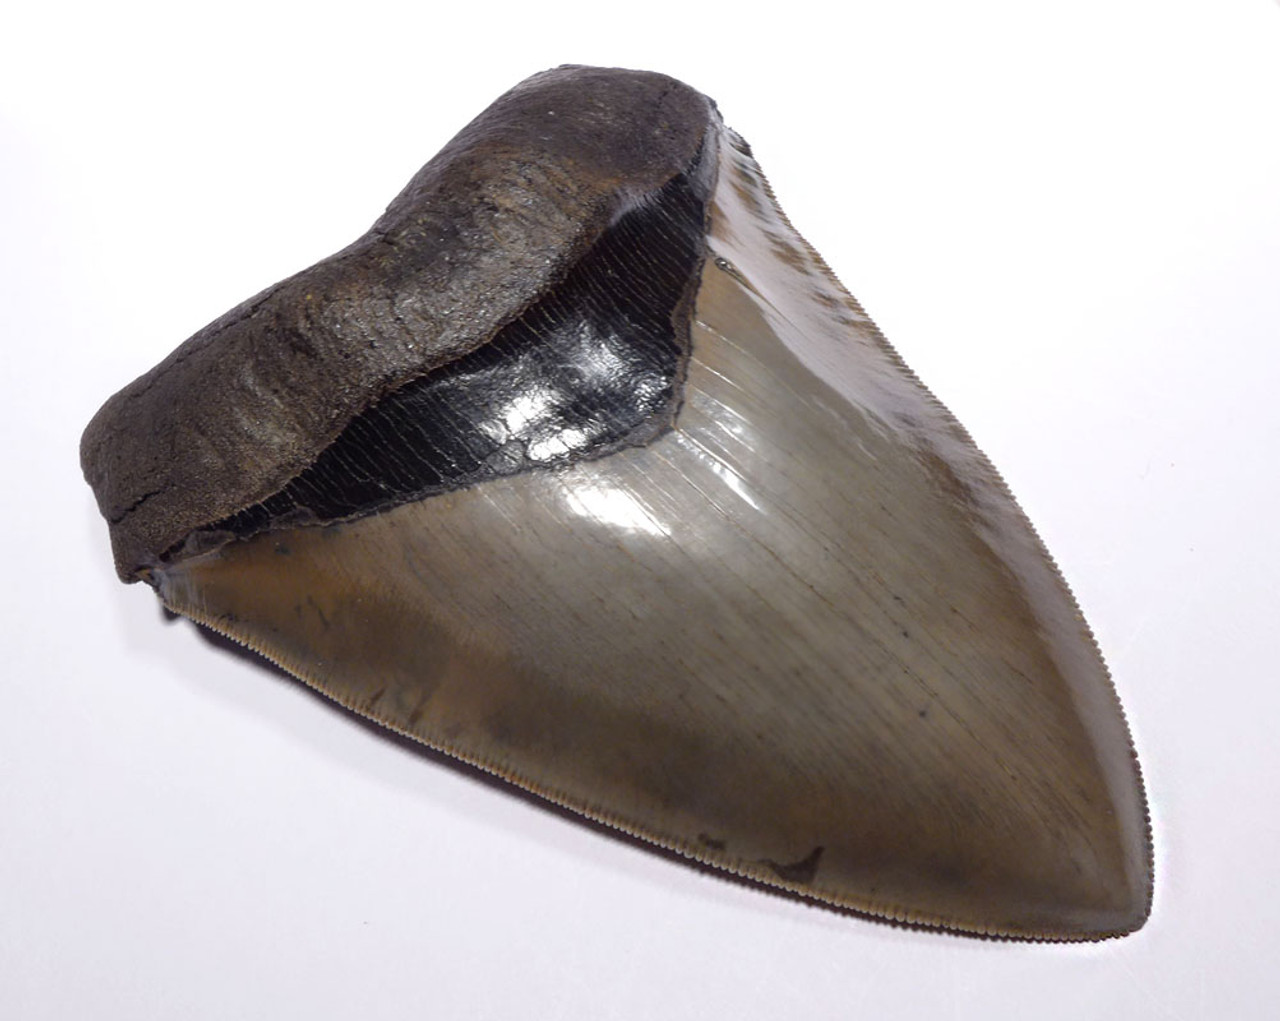 LARGE MEGALODON SHARK TOOTH 5.25 INCH COLLECTOR GRADE WITH STRONG CHATOYANCE *SH6-411